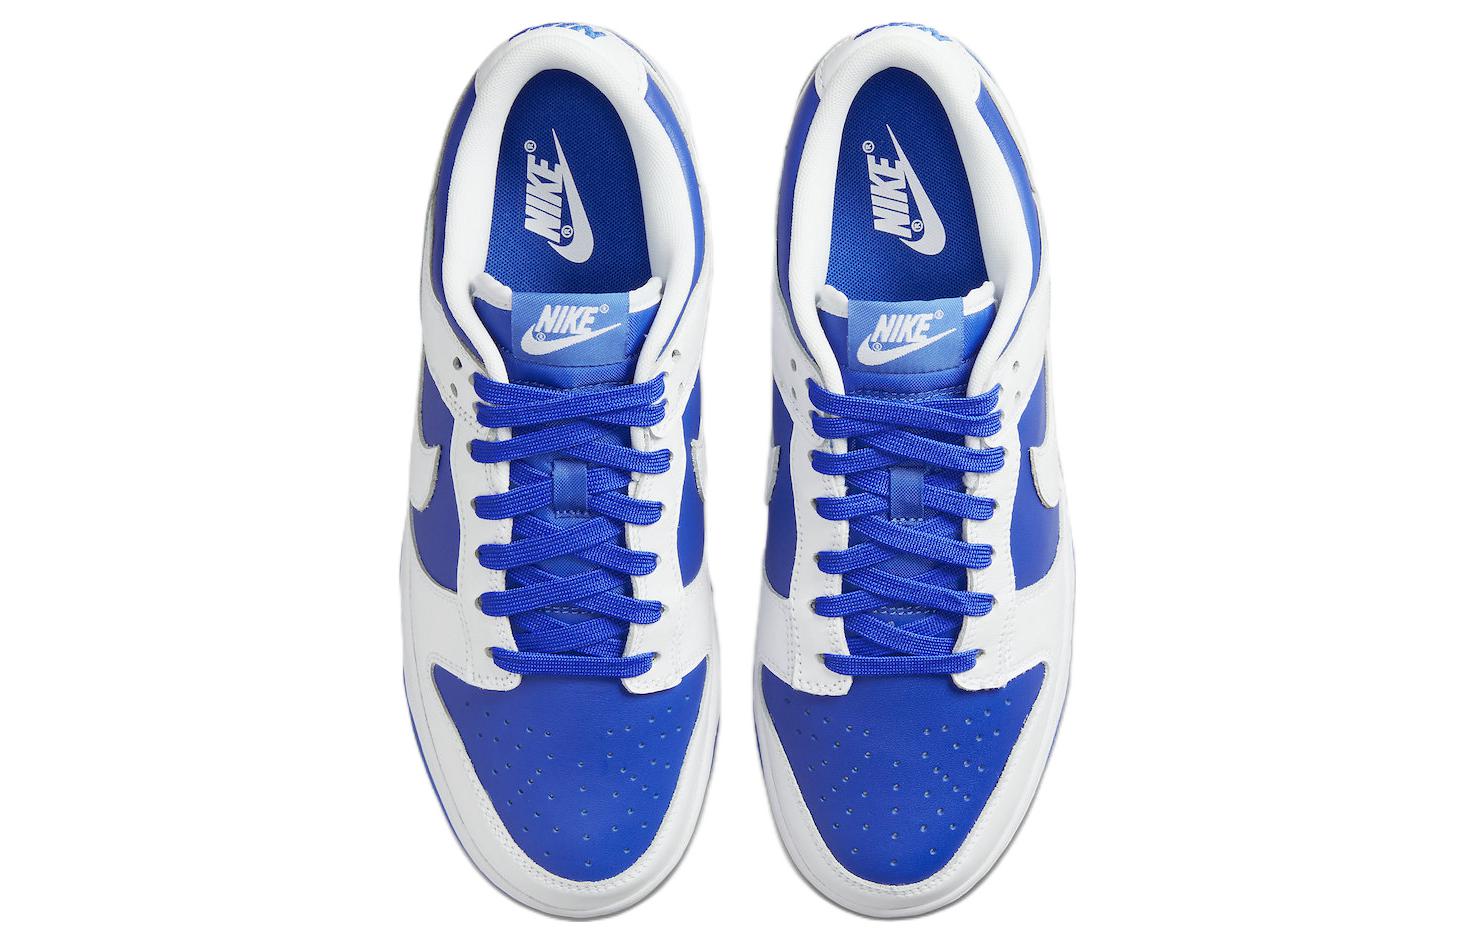 Nike Dunk Low \'Racer Blue White\'  DD1391-401 Classic Sneakers